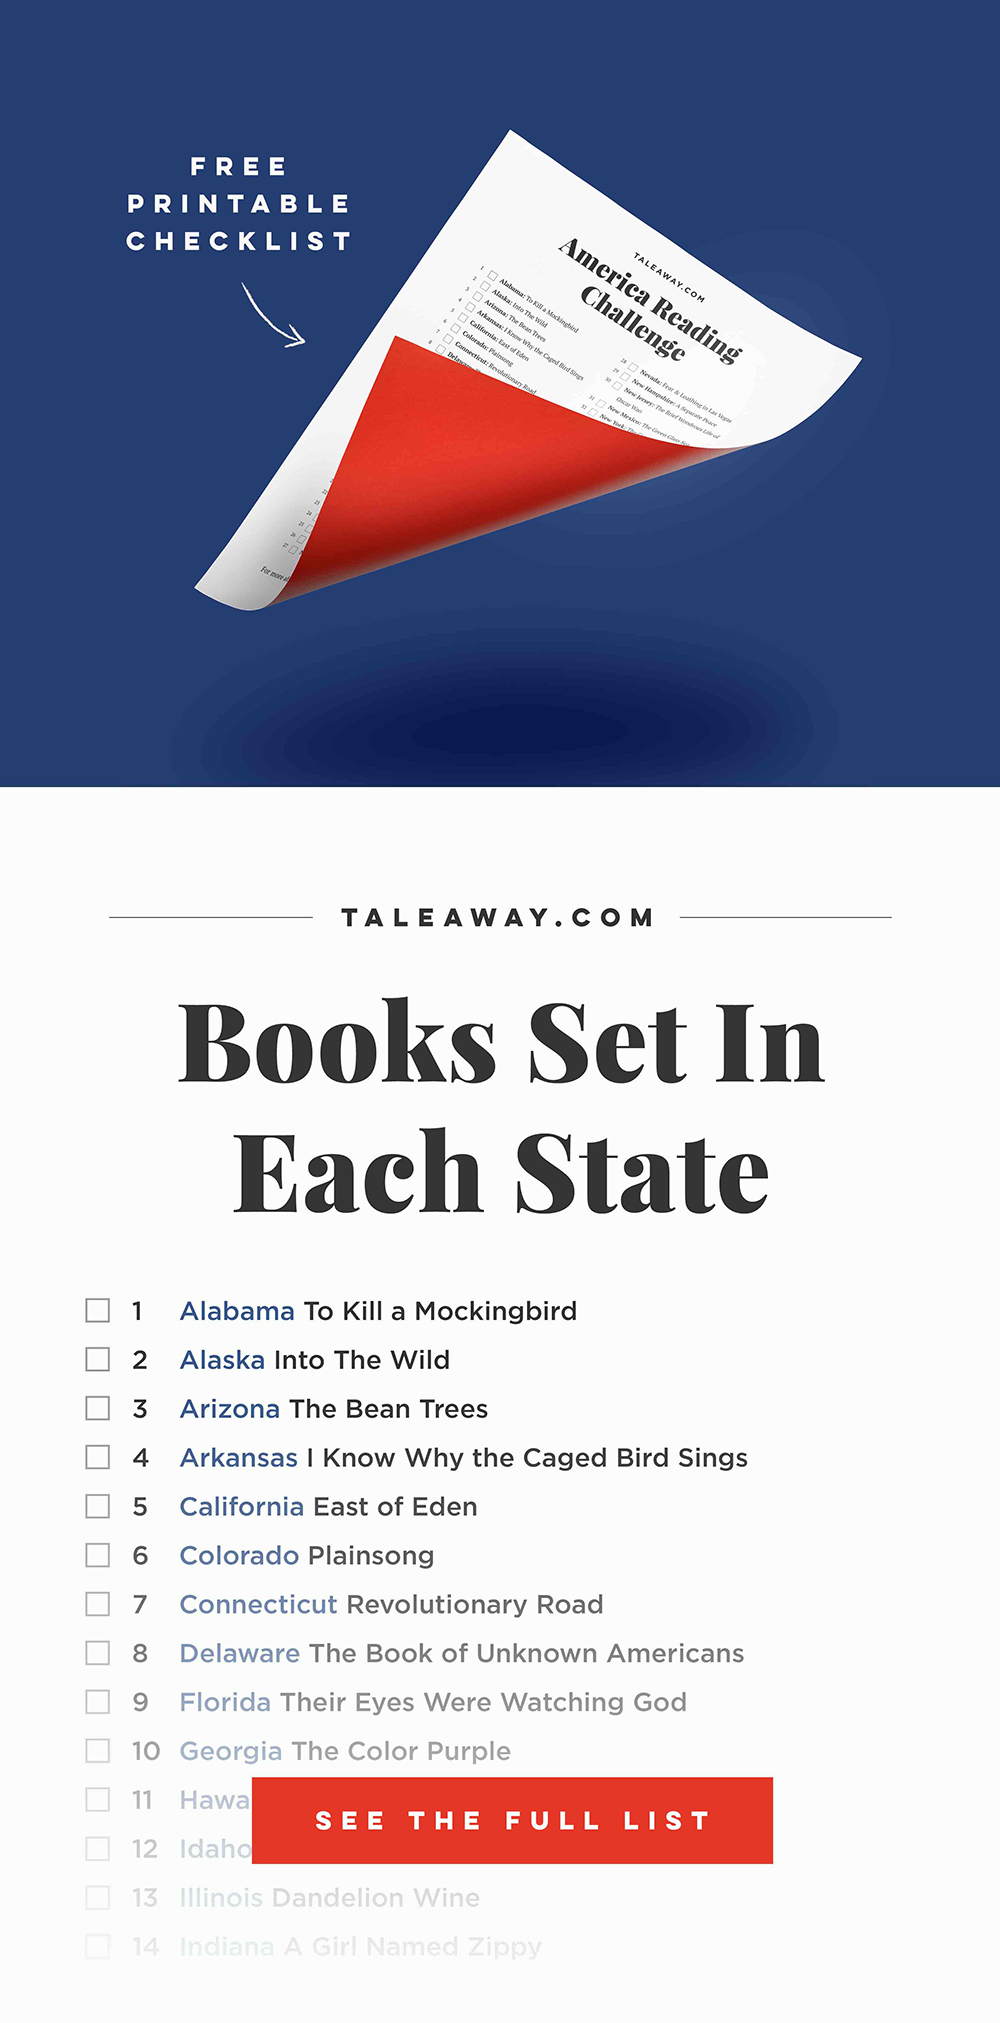 Books Set In Each State. Visit www.taleway.com to find books set around the world. america reading challenge, books set in every state, books from every state, books from each state, most popular book in each state, books about each state, books to read from every state, us road trip, usa book list, american books, american book covers, american books reading list, usa books, us books, book challenge, reading challenge, books set in america, state books series, 50 states book list